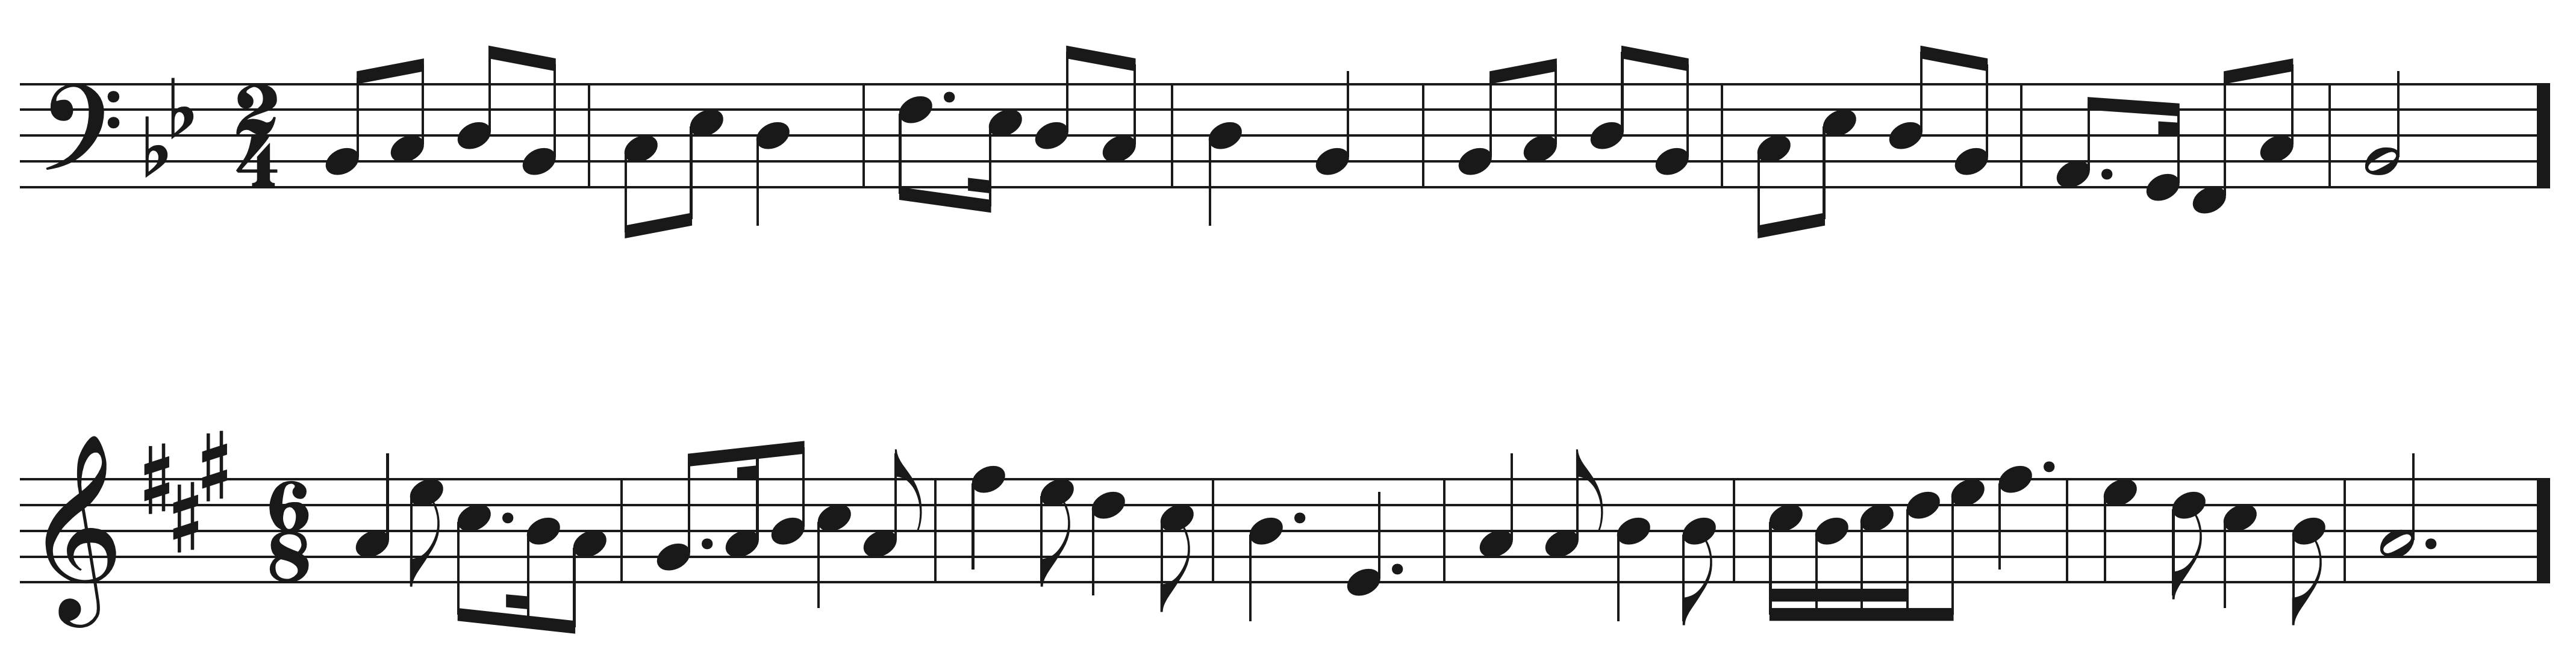 Musical Phrase Sight Singing exercise example